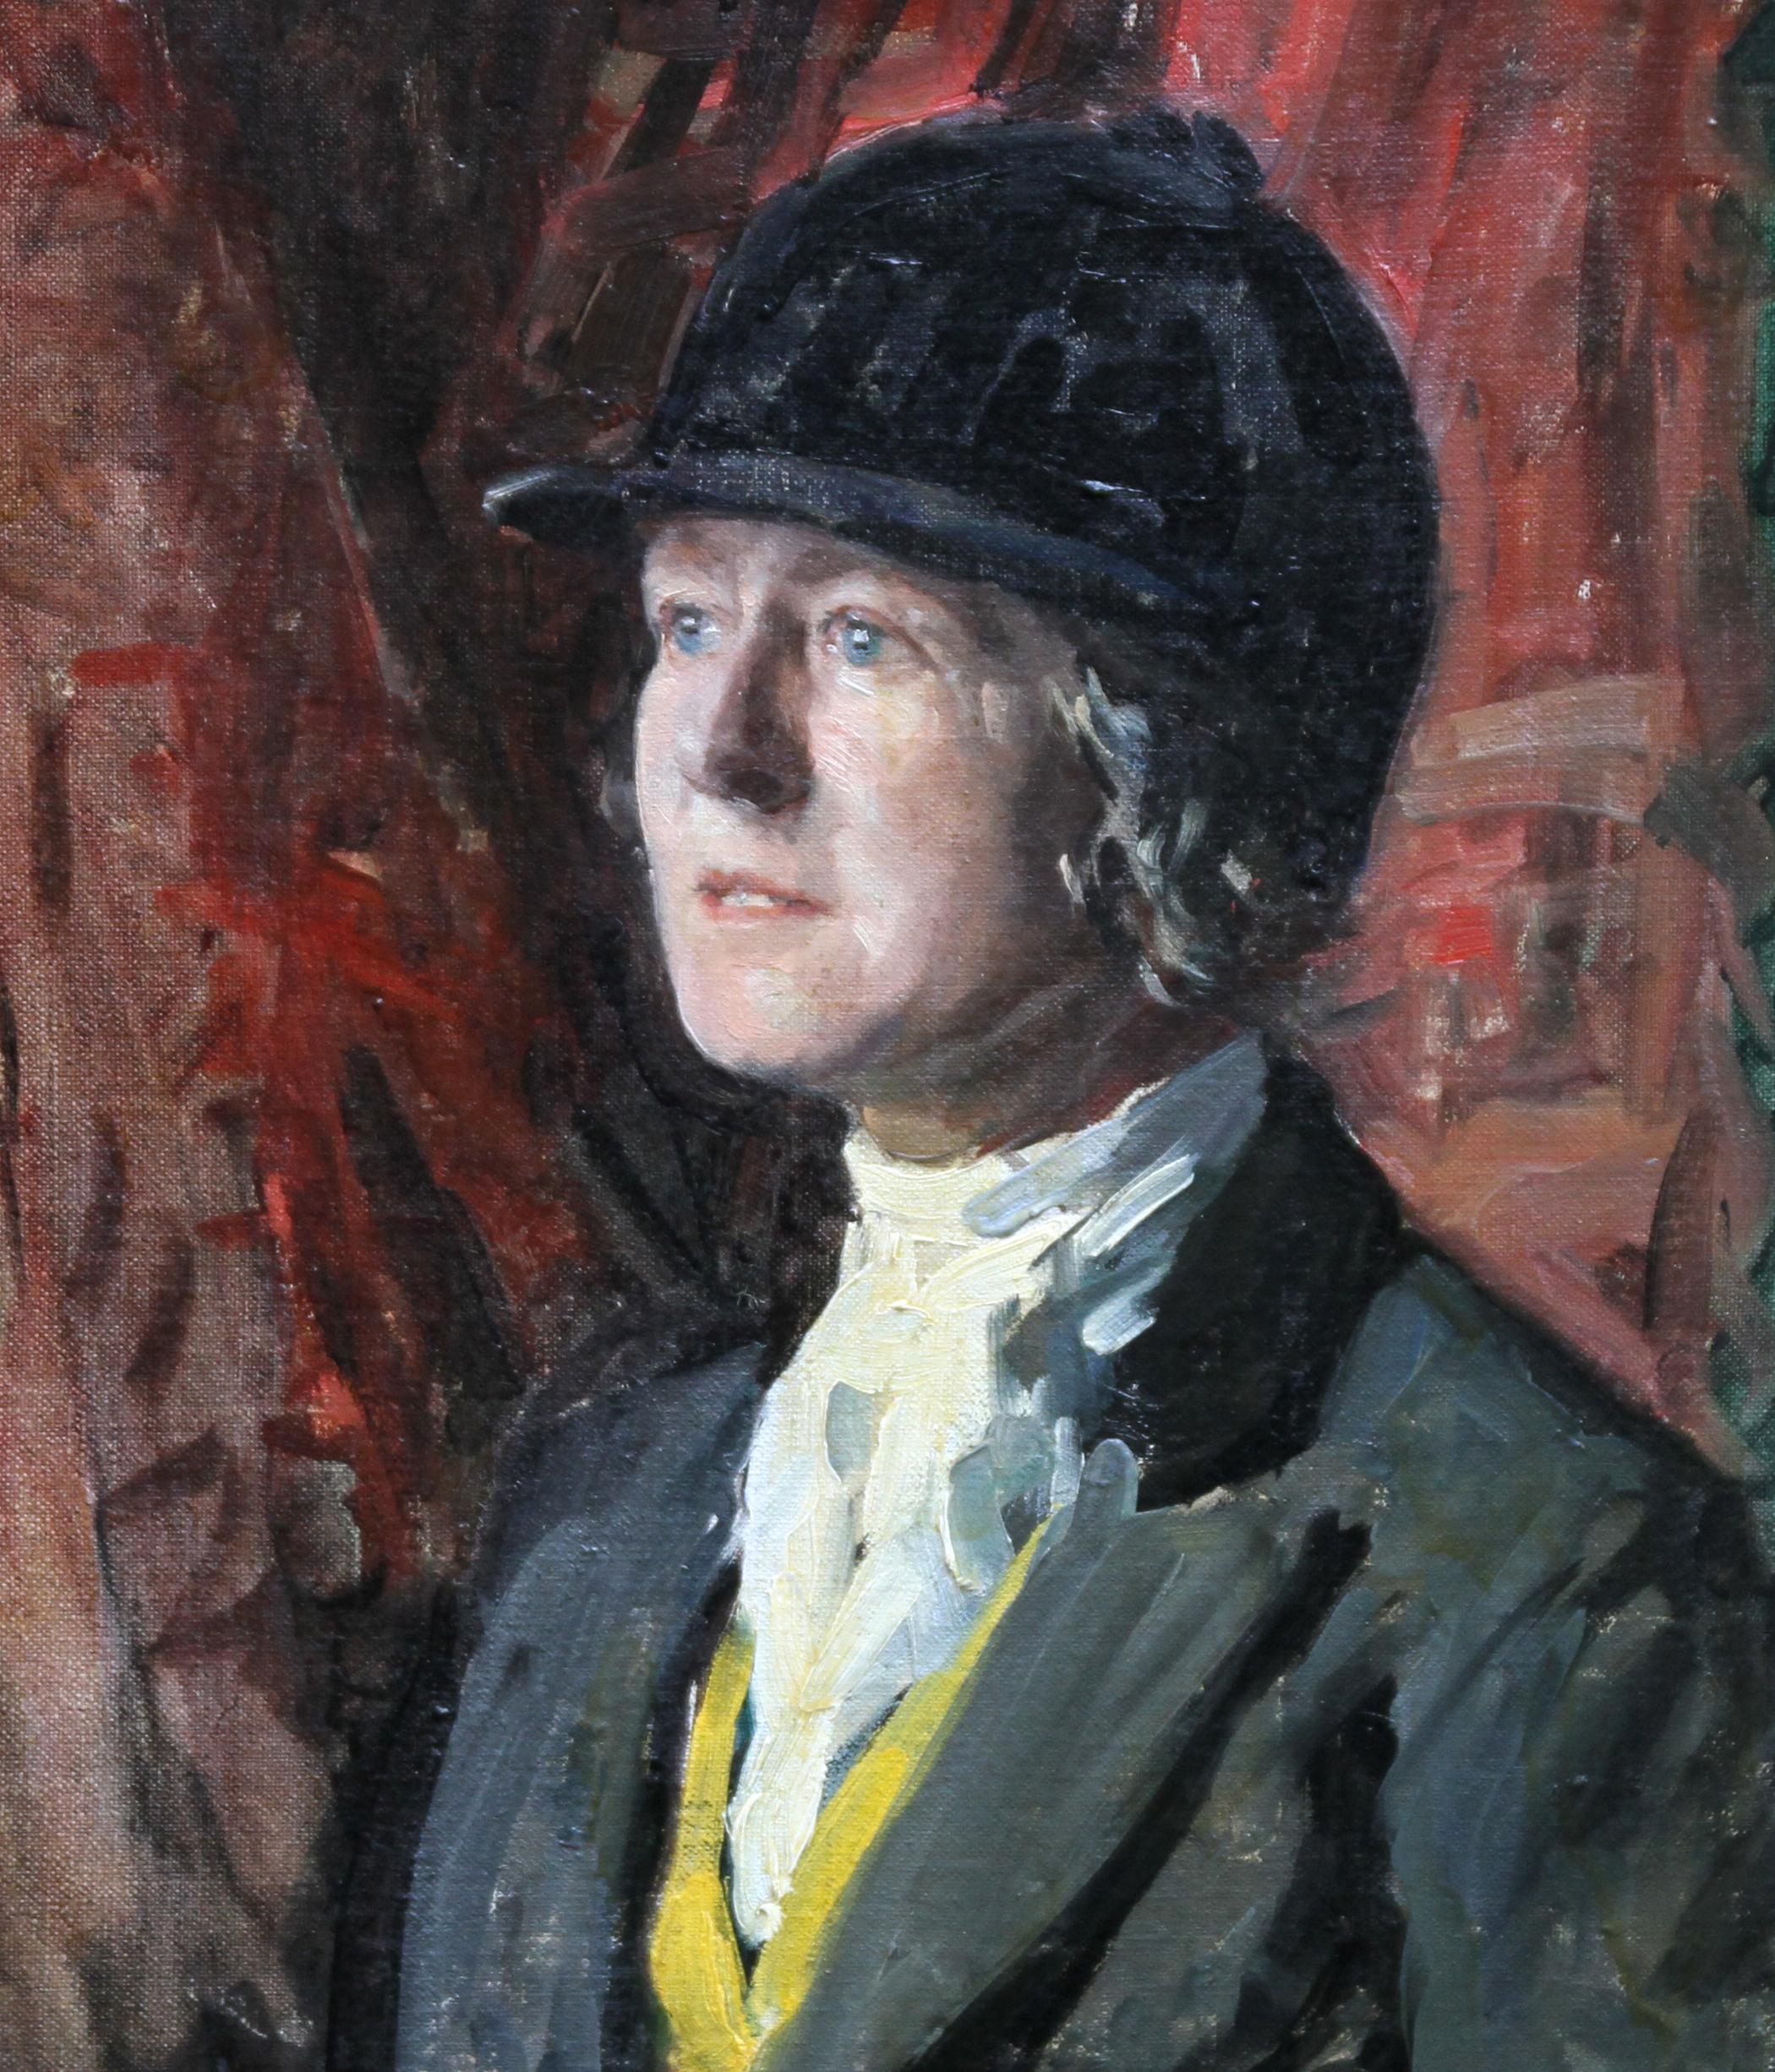 A fine portrait oil painting by noted Scottish artist David Murray Urquhart. Painted circa 1930 the portrait is of a woman in horse riding gear and has wonderful tones and brushwork. A fine example of inter war 20th century British Art Deco